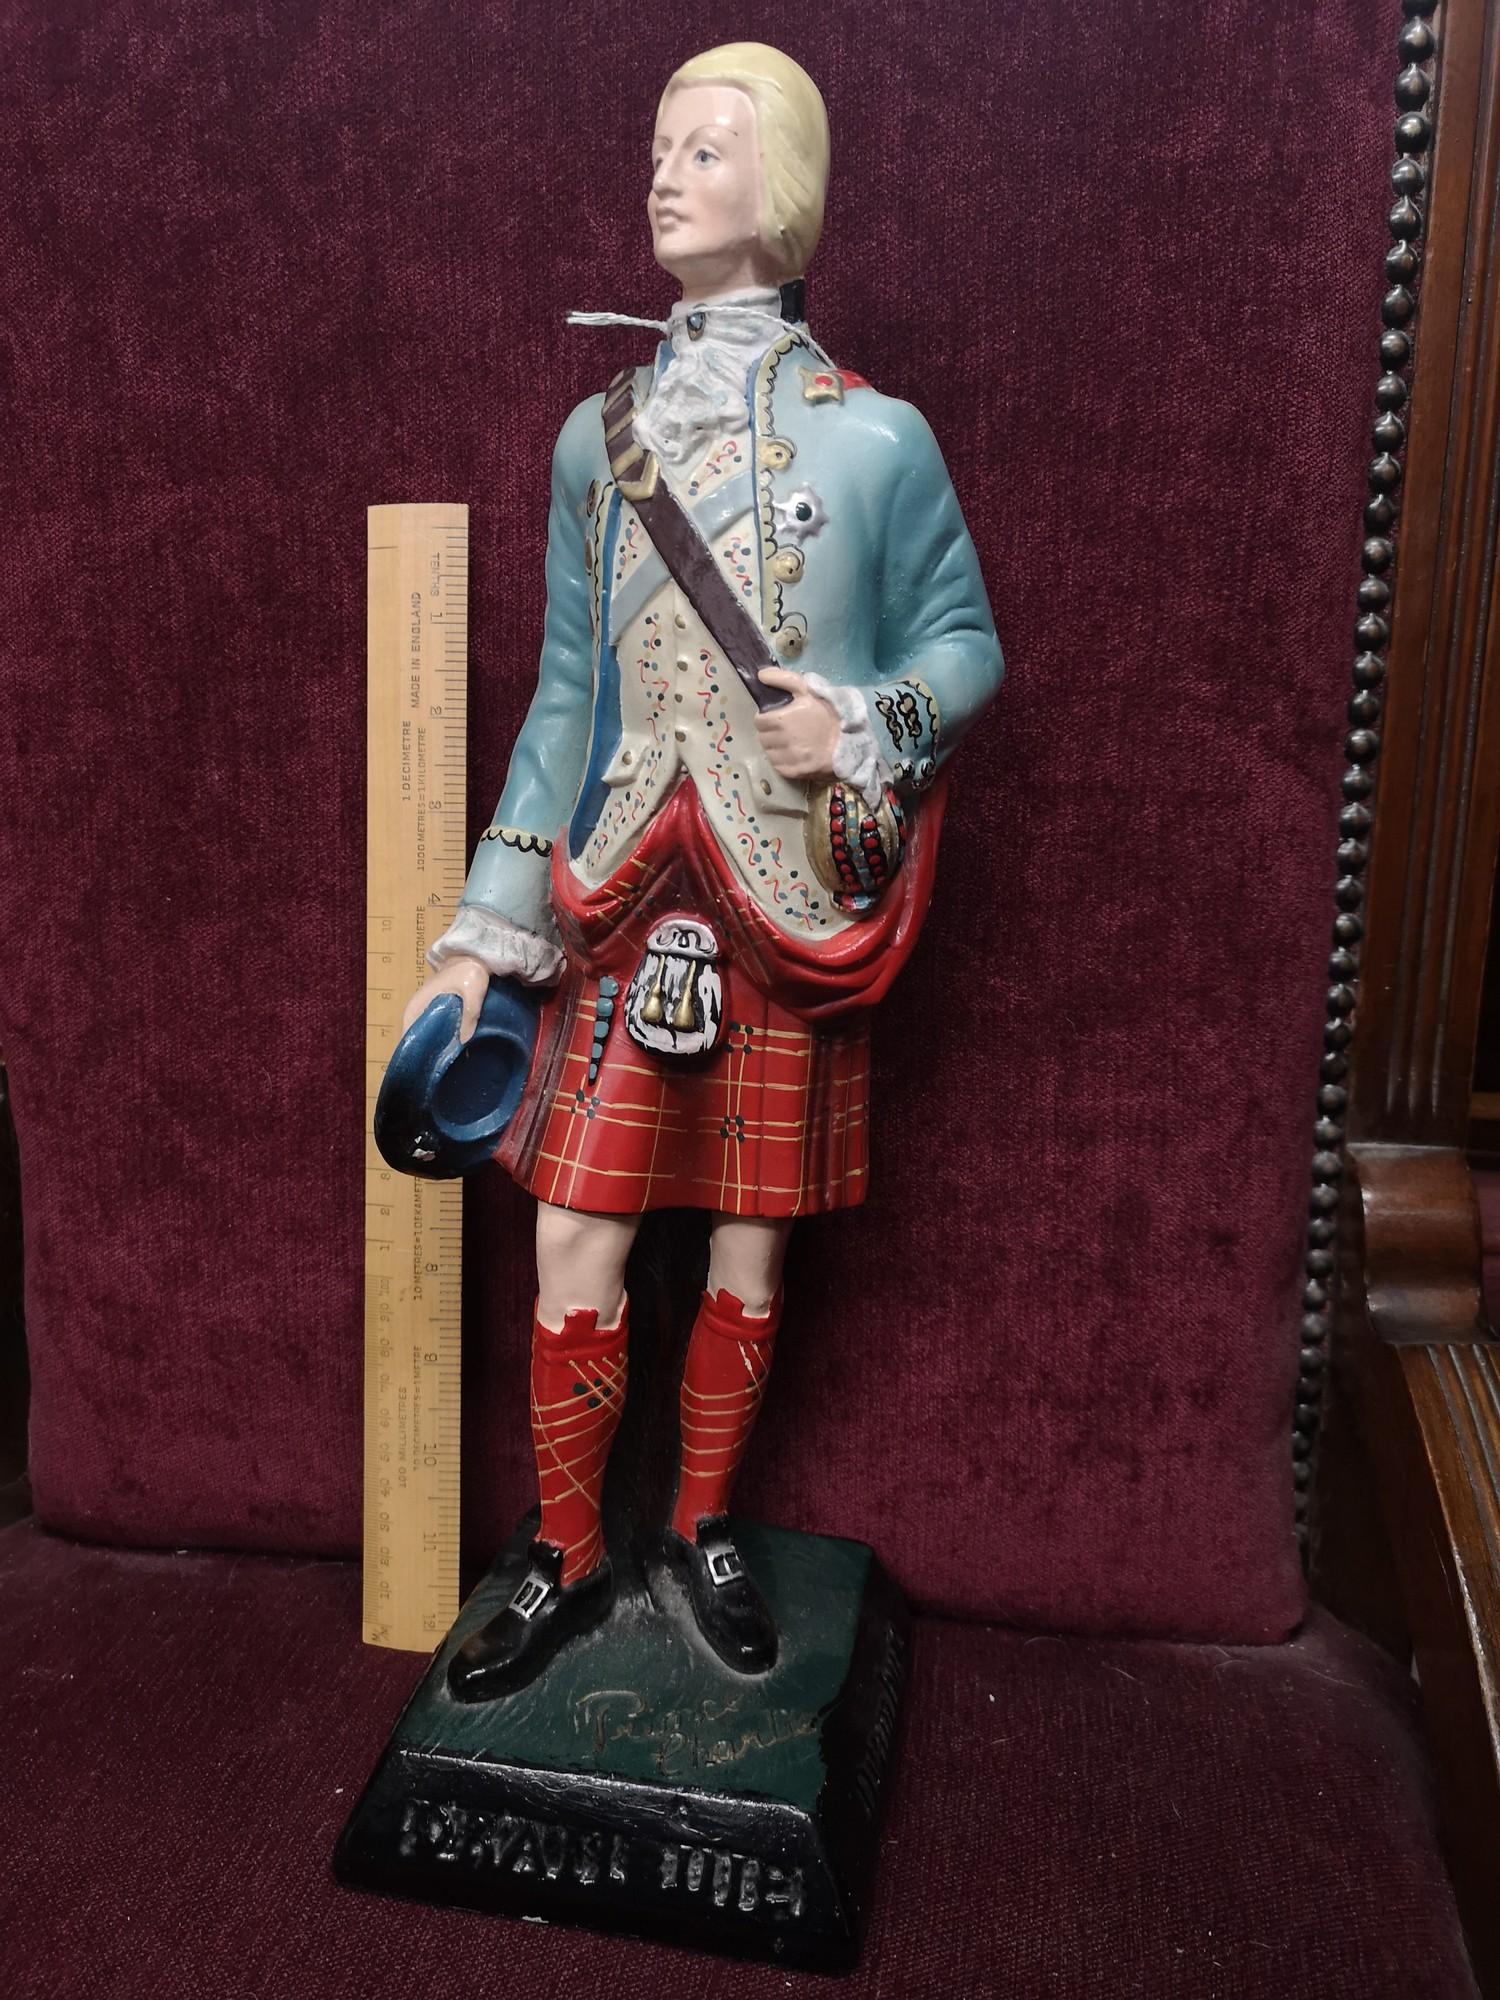 Large Dranbuie bonny Prince Charlie advertising figure. 15 inches high.